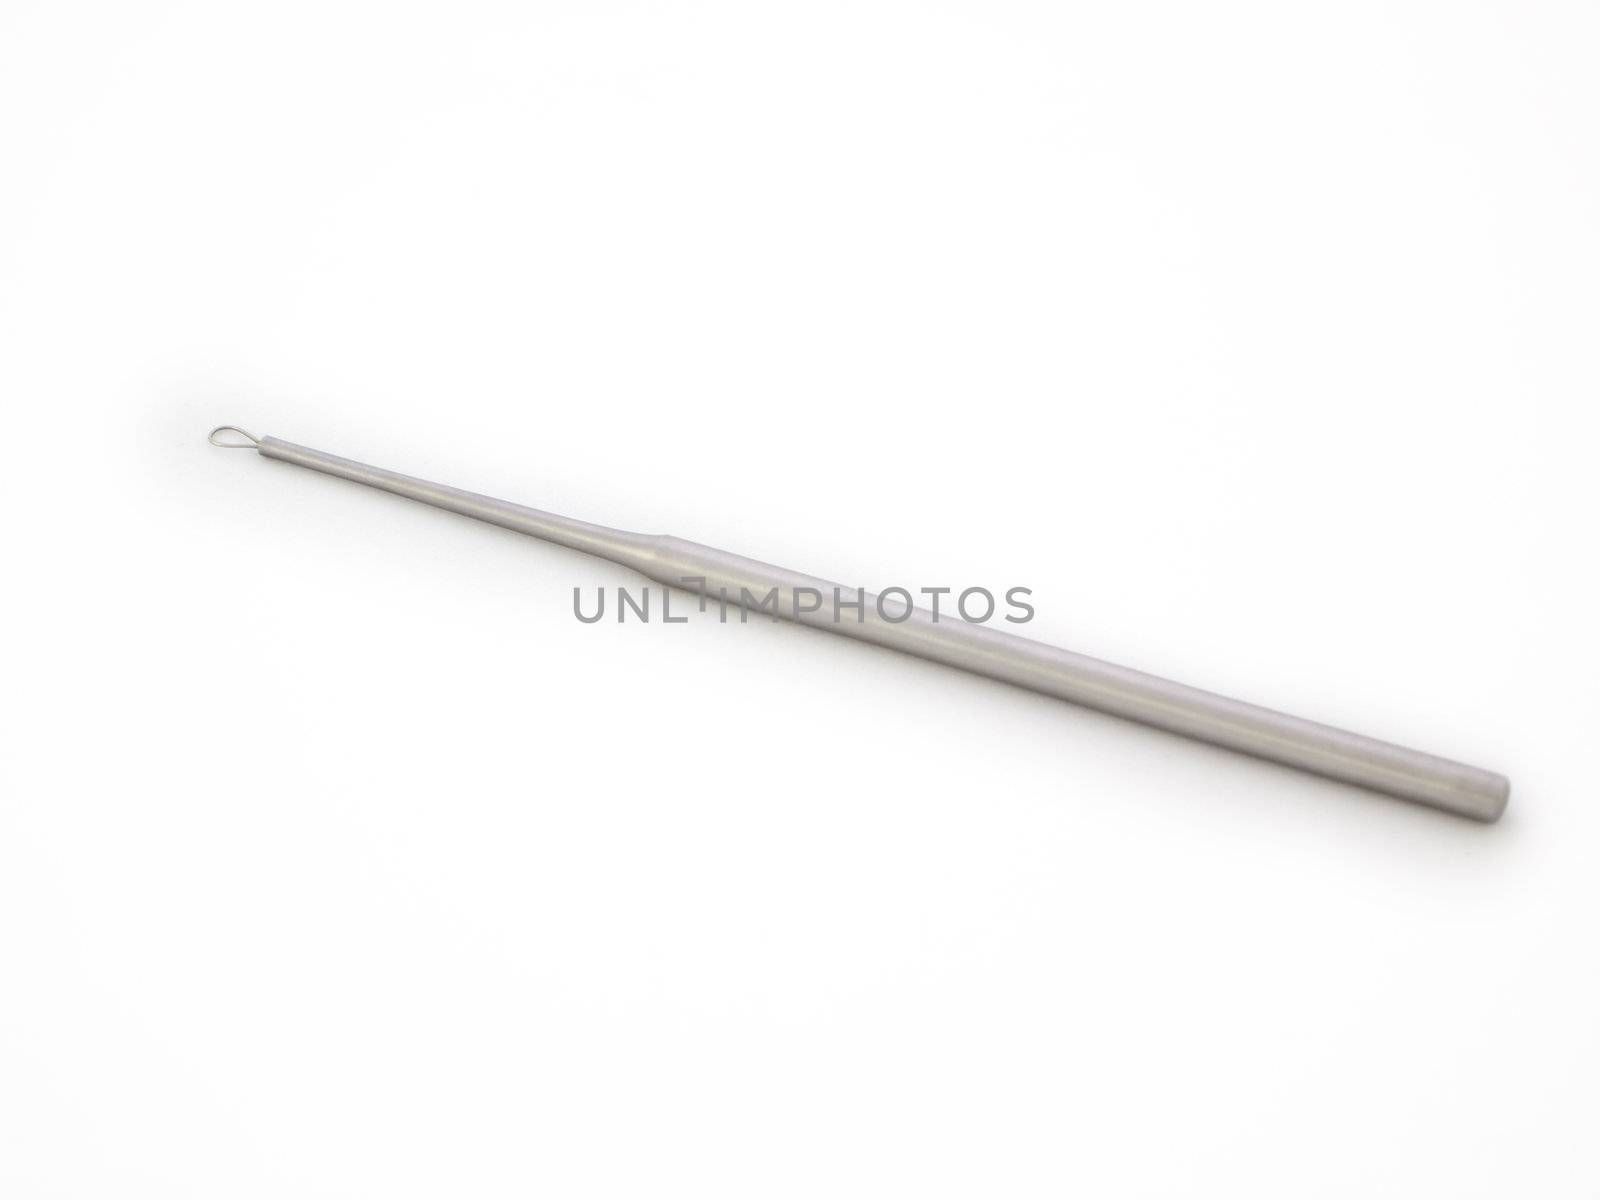 A cerumen curette isolated on a white background. It is a medical instrument used by the ENT specialist to remove ear wax.